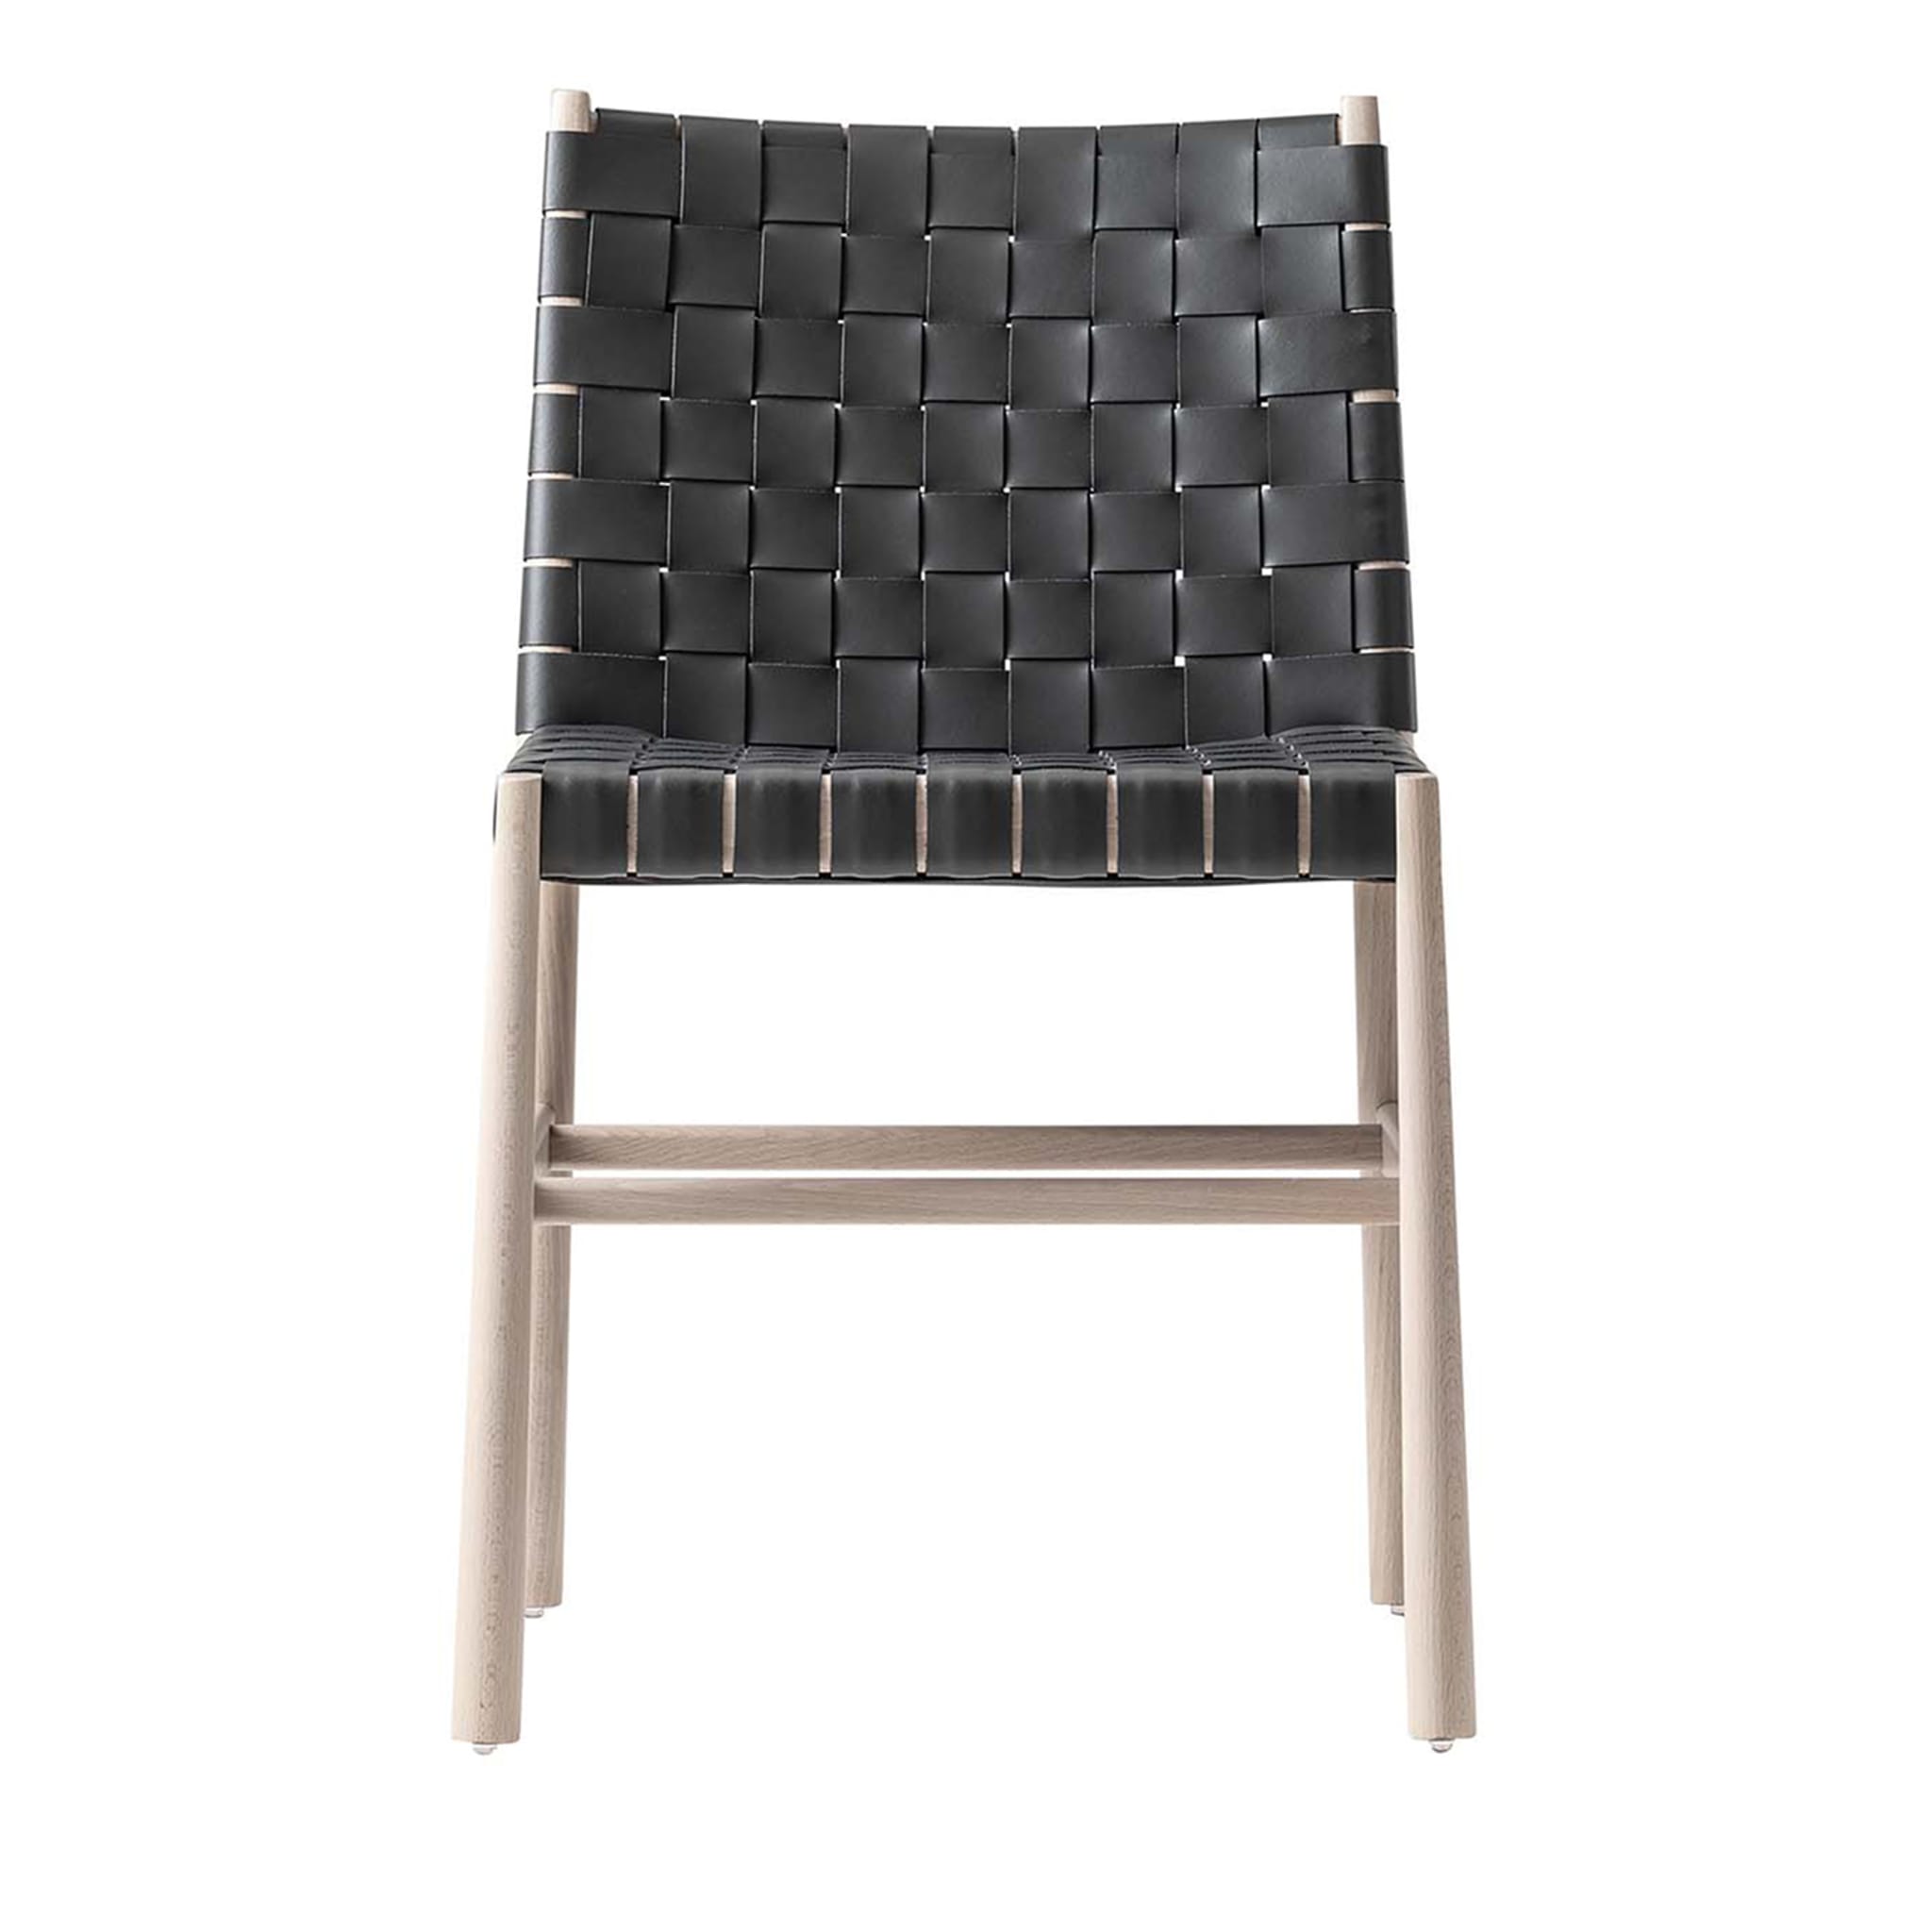 Julie White and Black Leather Chair by Emilio Nanni - Main view